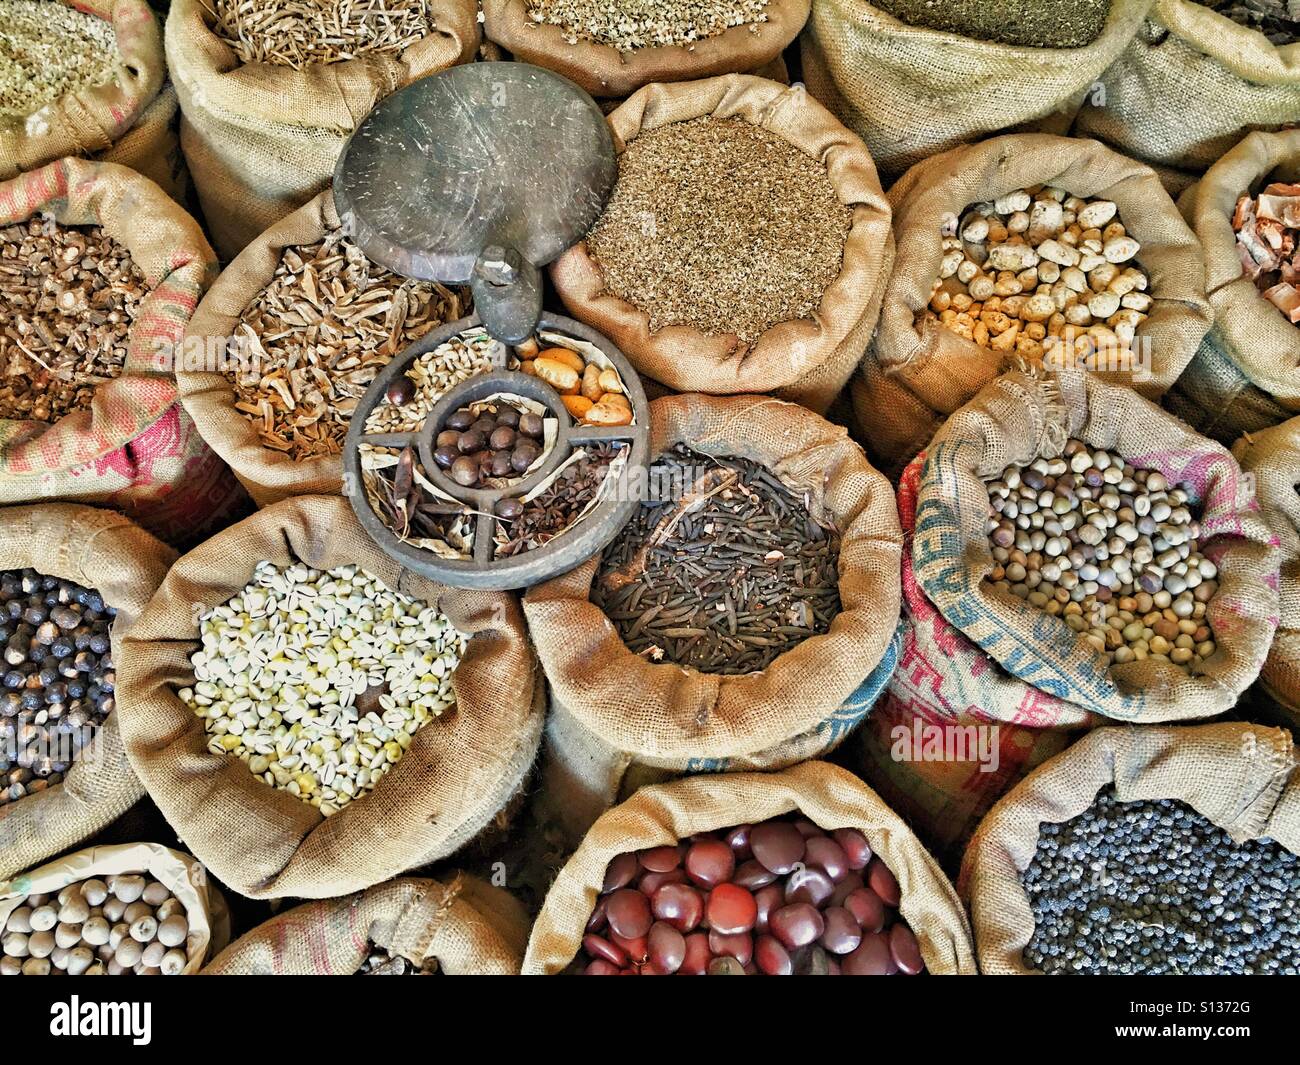 Variety of spices Stock Photo